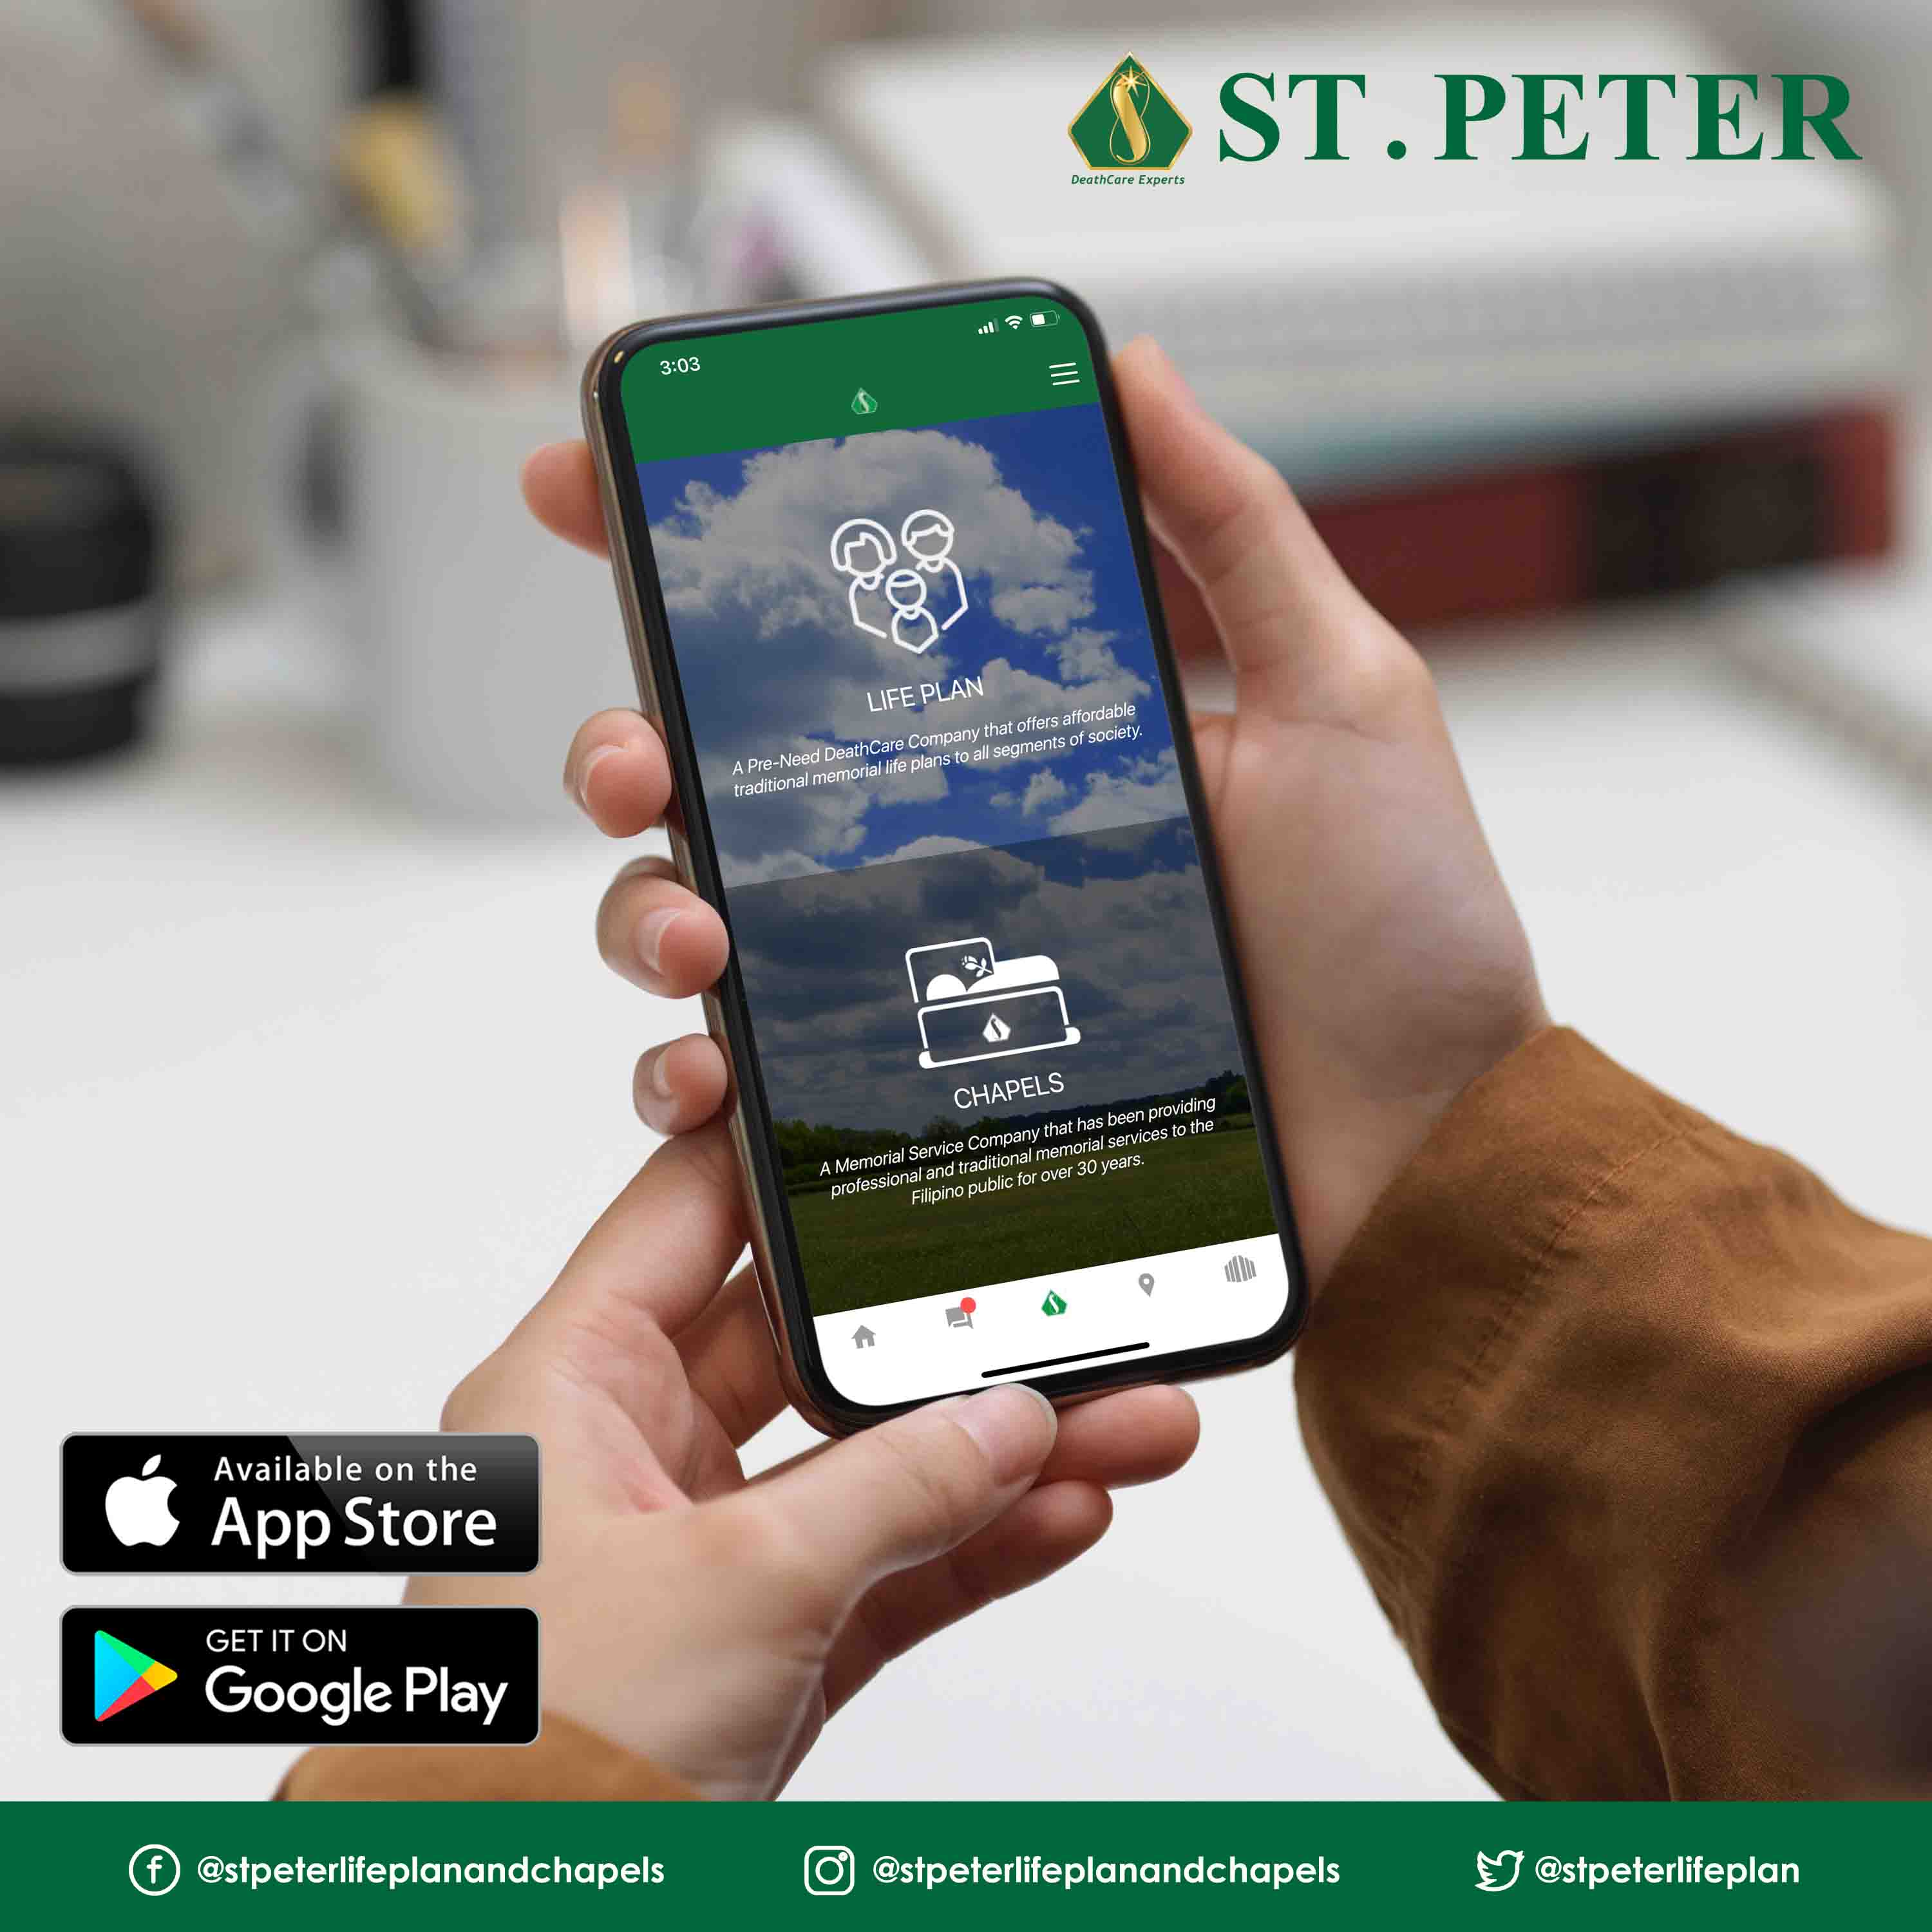 St Peter pre-need life plan philippines app from Google play and Apple app store